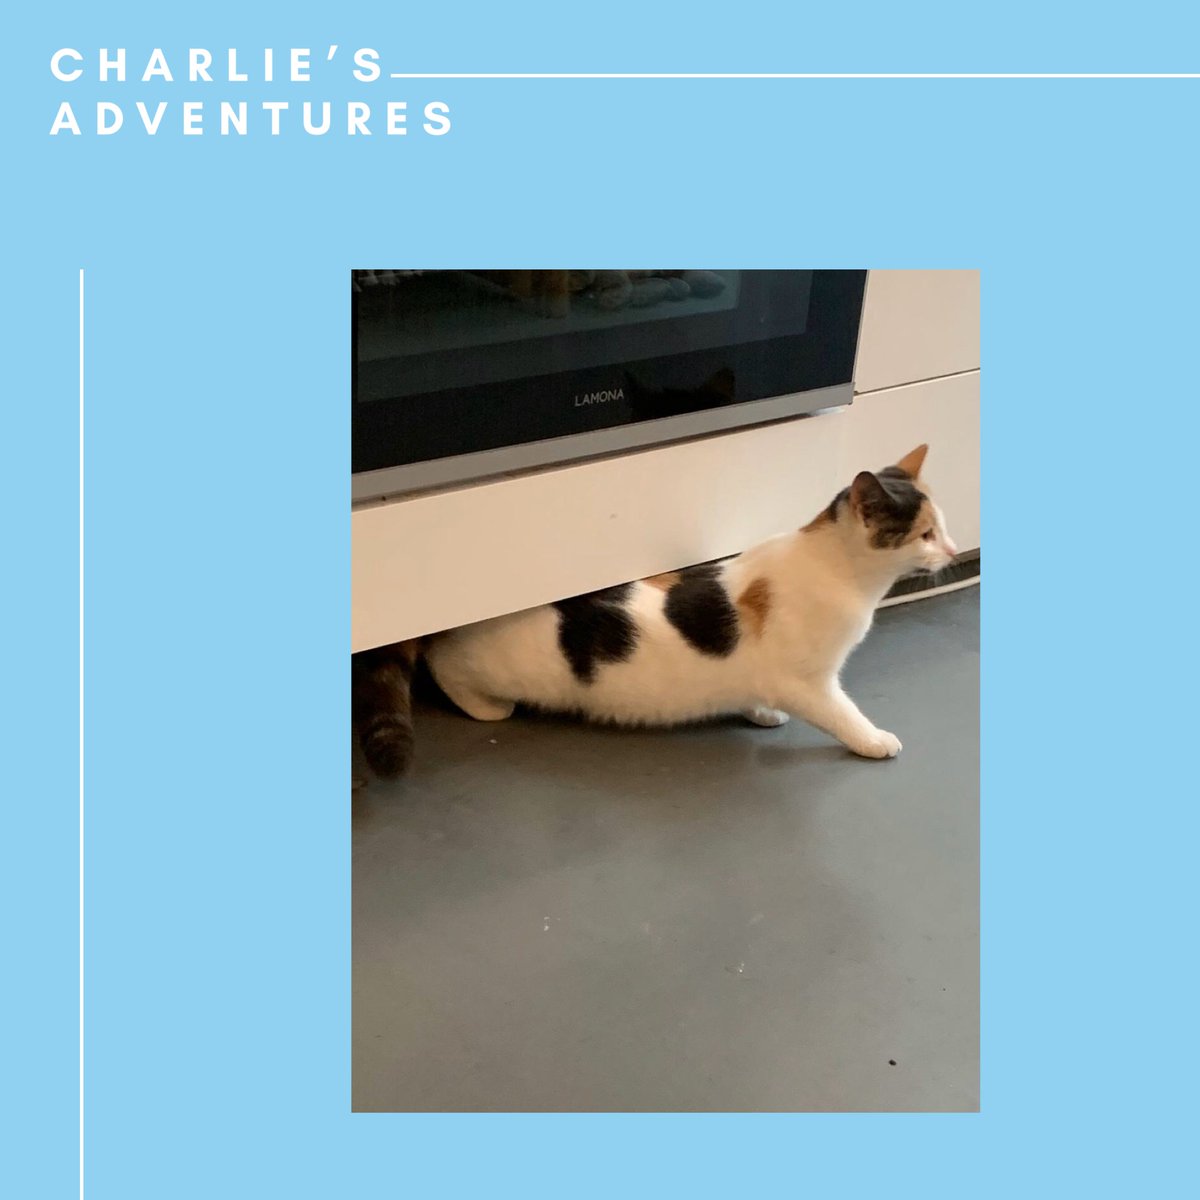 This week Charlie is acting as sous chef in the kitchen. #CatsinPublishing #CatsofTwitter #CharliesAdventures